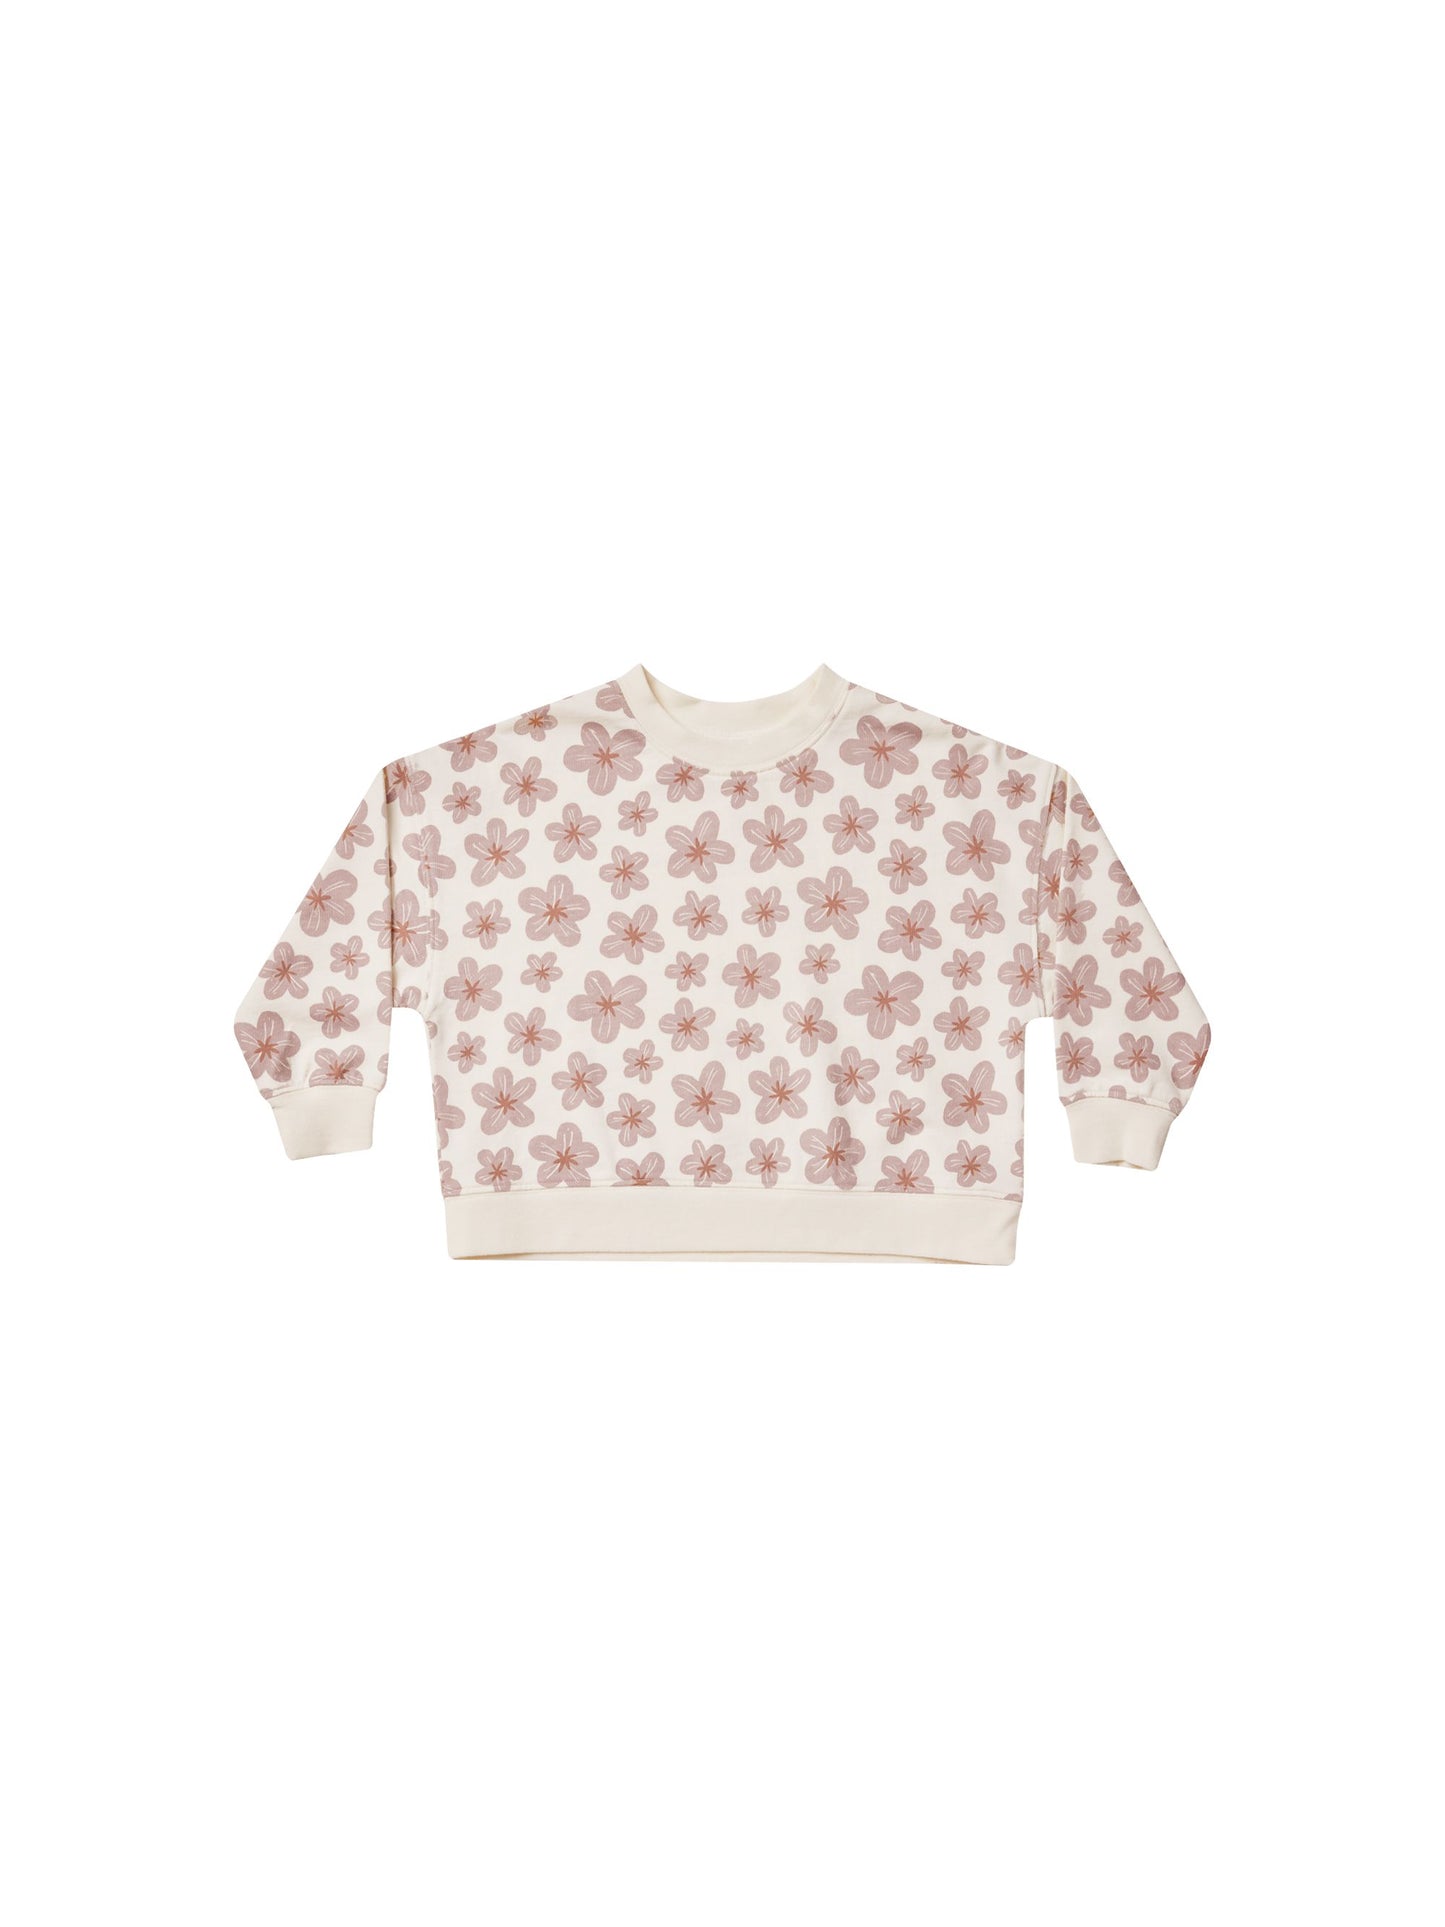 Toddler Boxy Pullover - Hibiscus